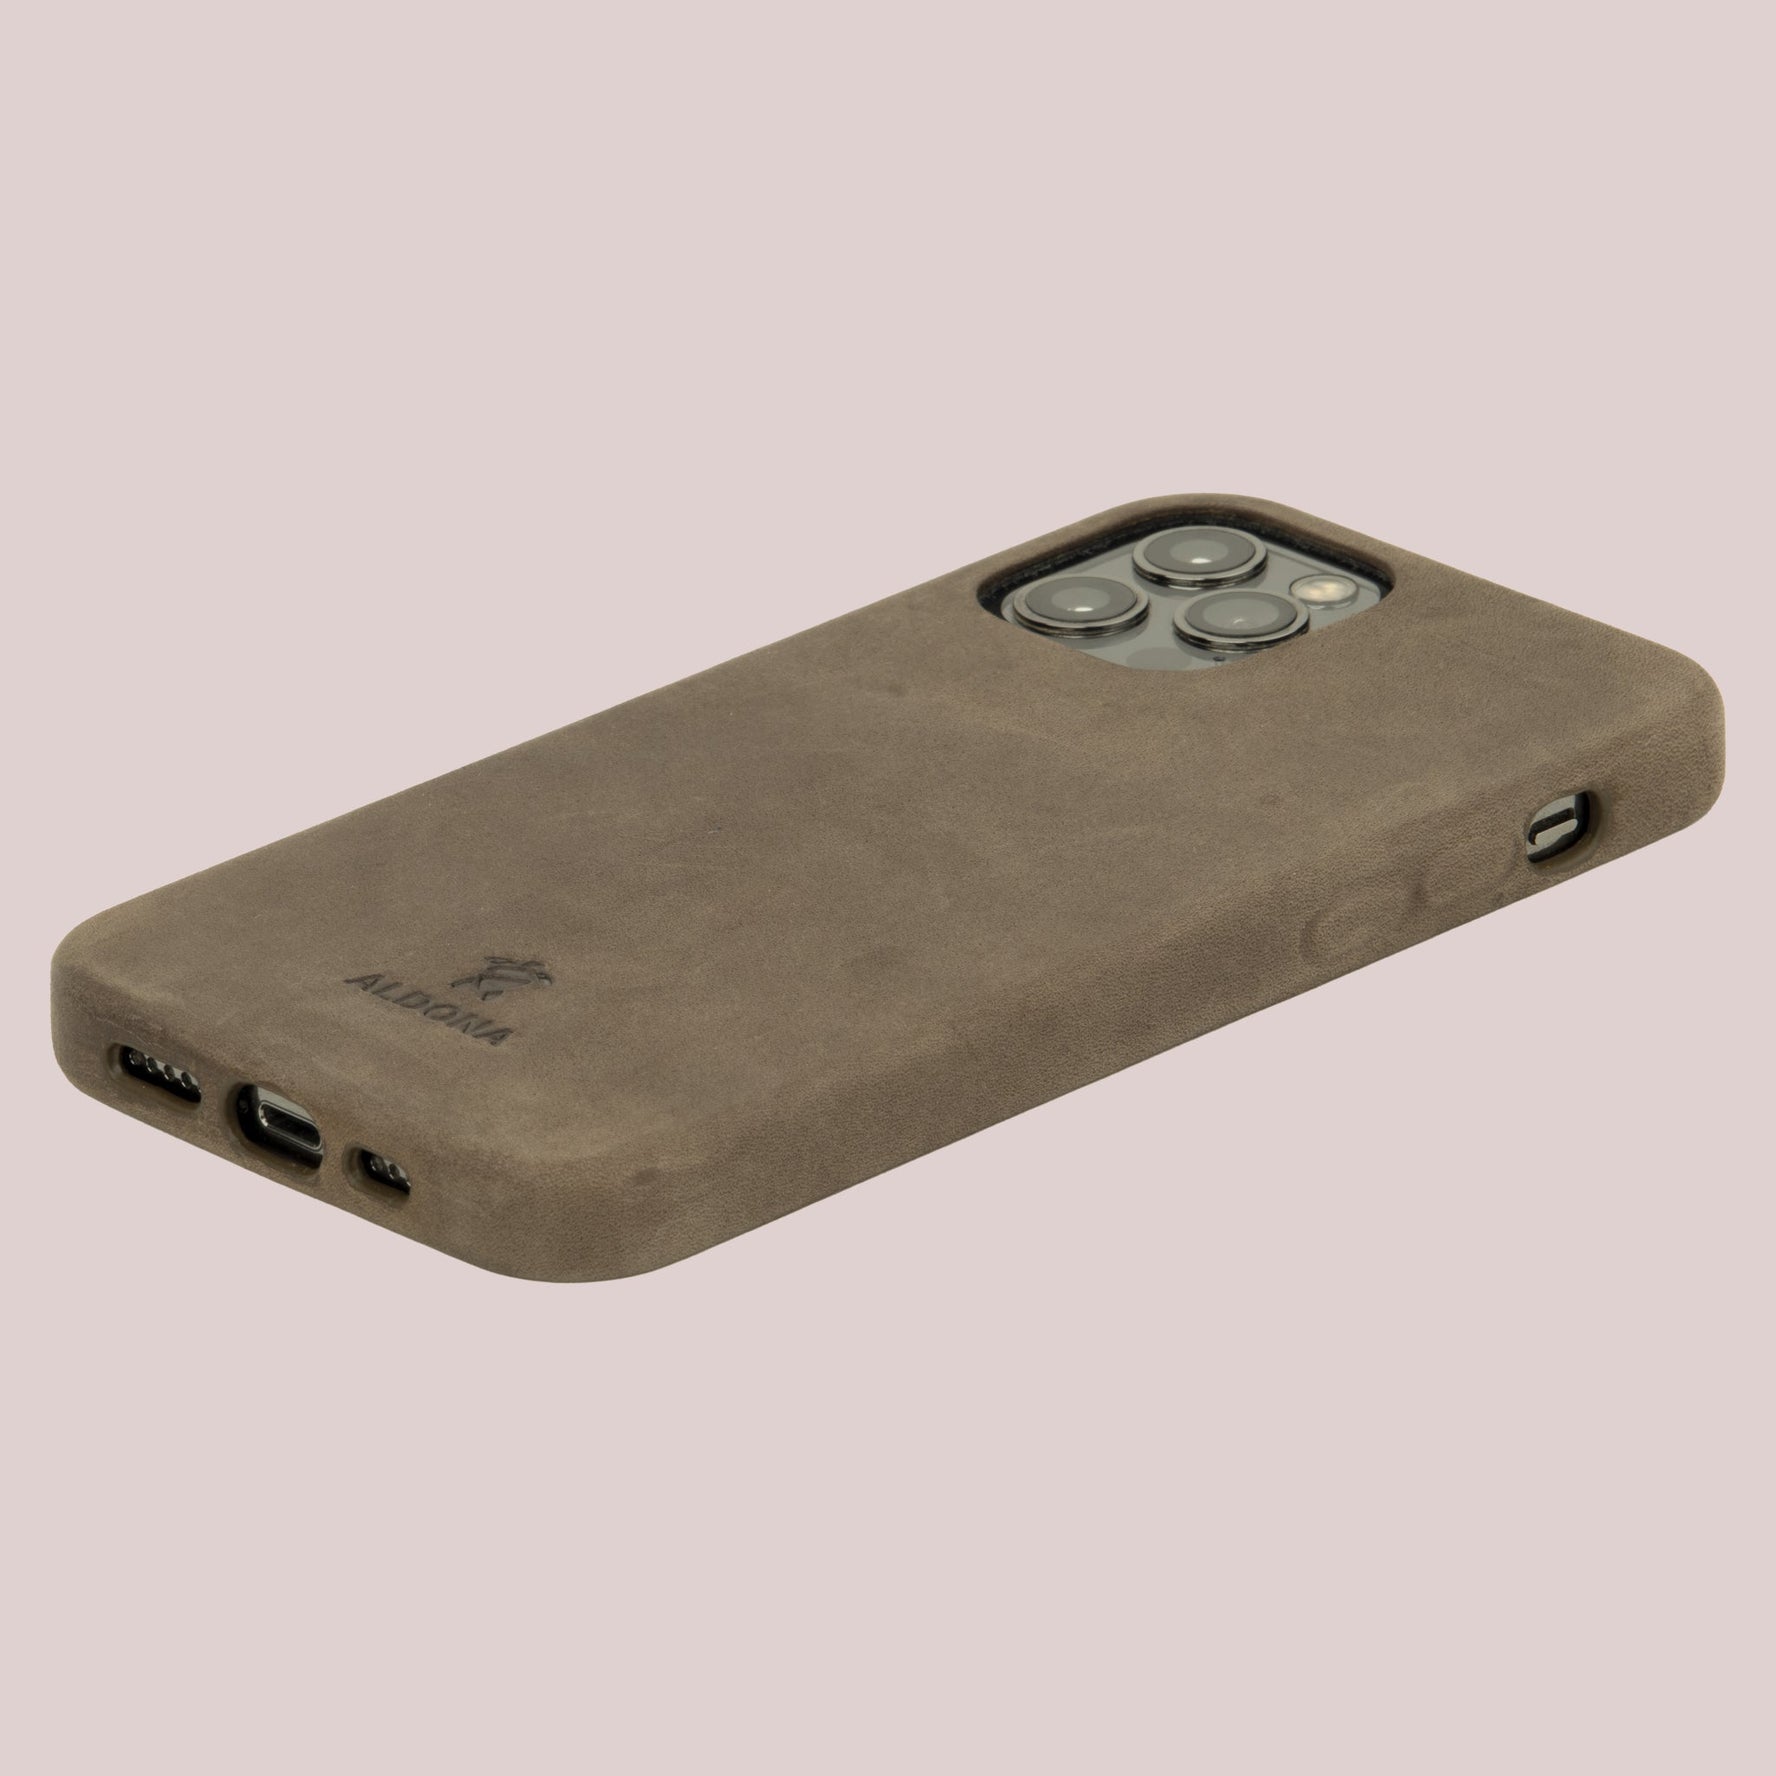 Kalon Case for iPhone 14 series with MagSafe Compatibility - Burnt Tobacco